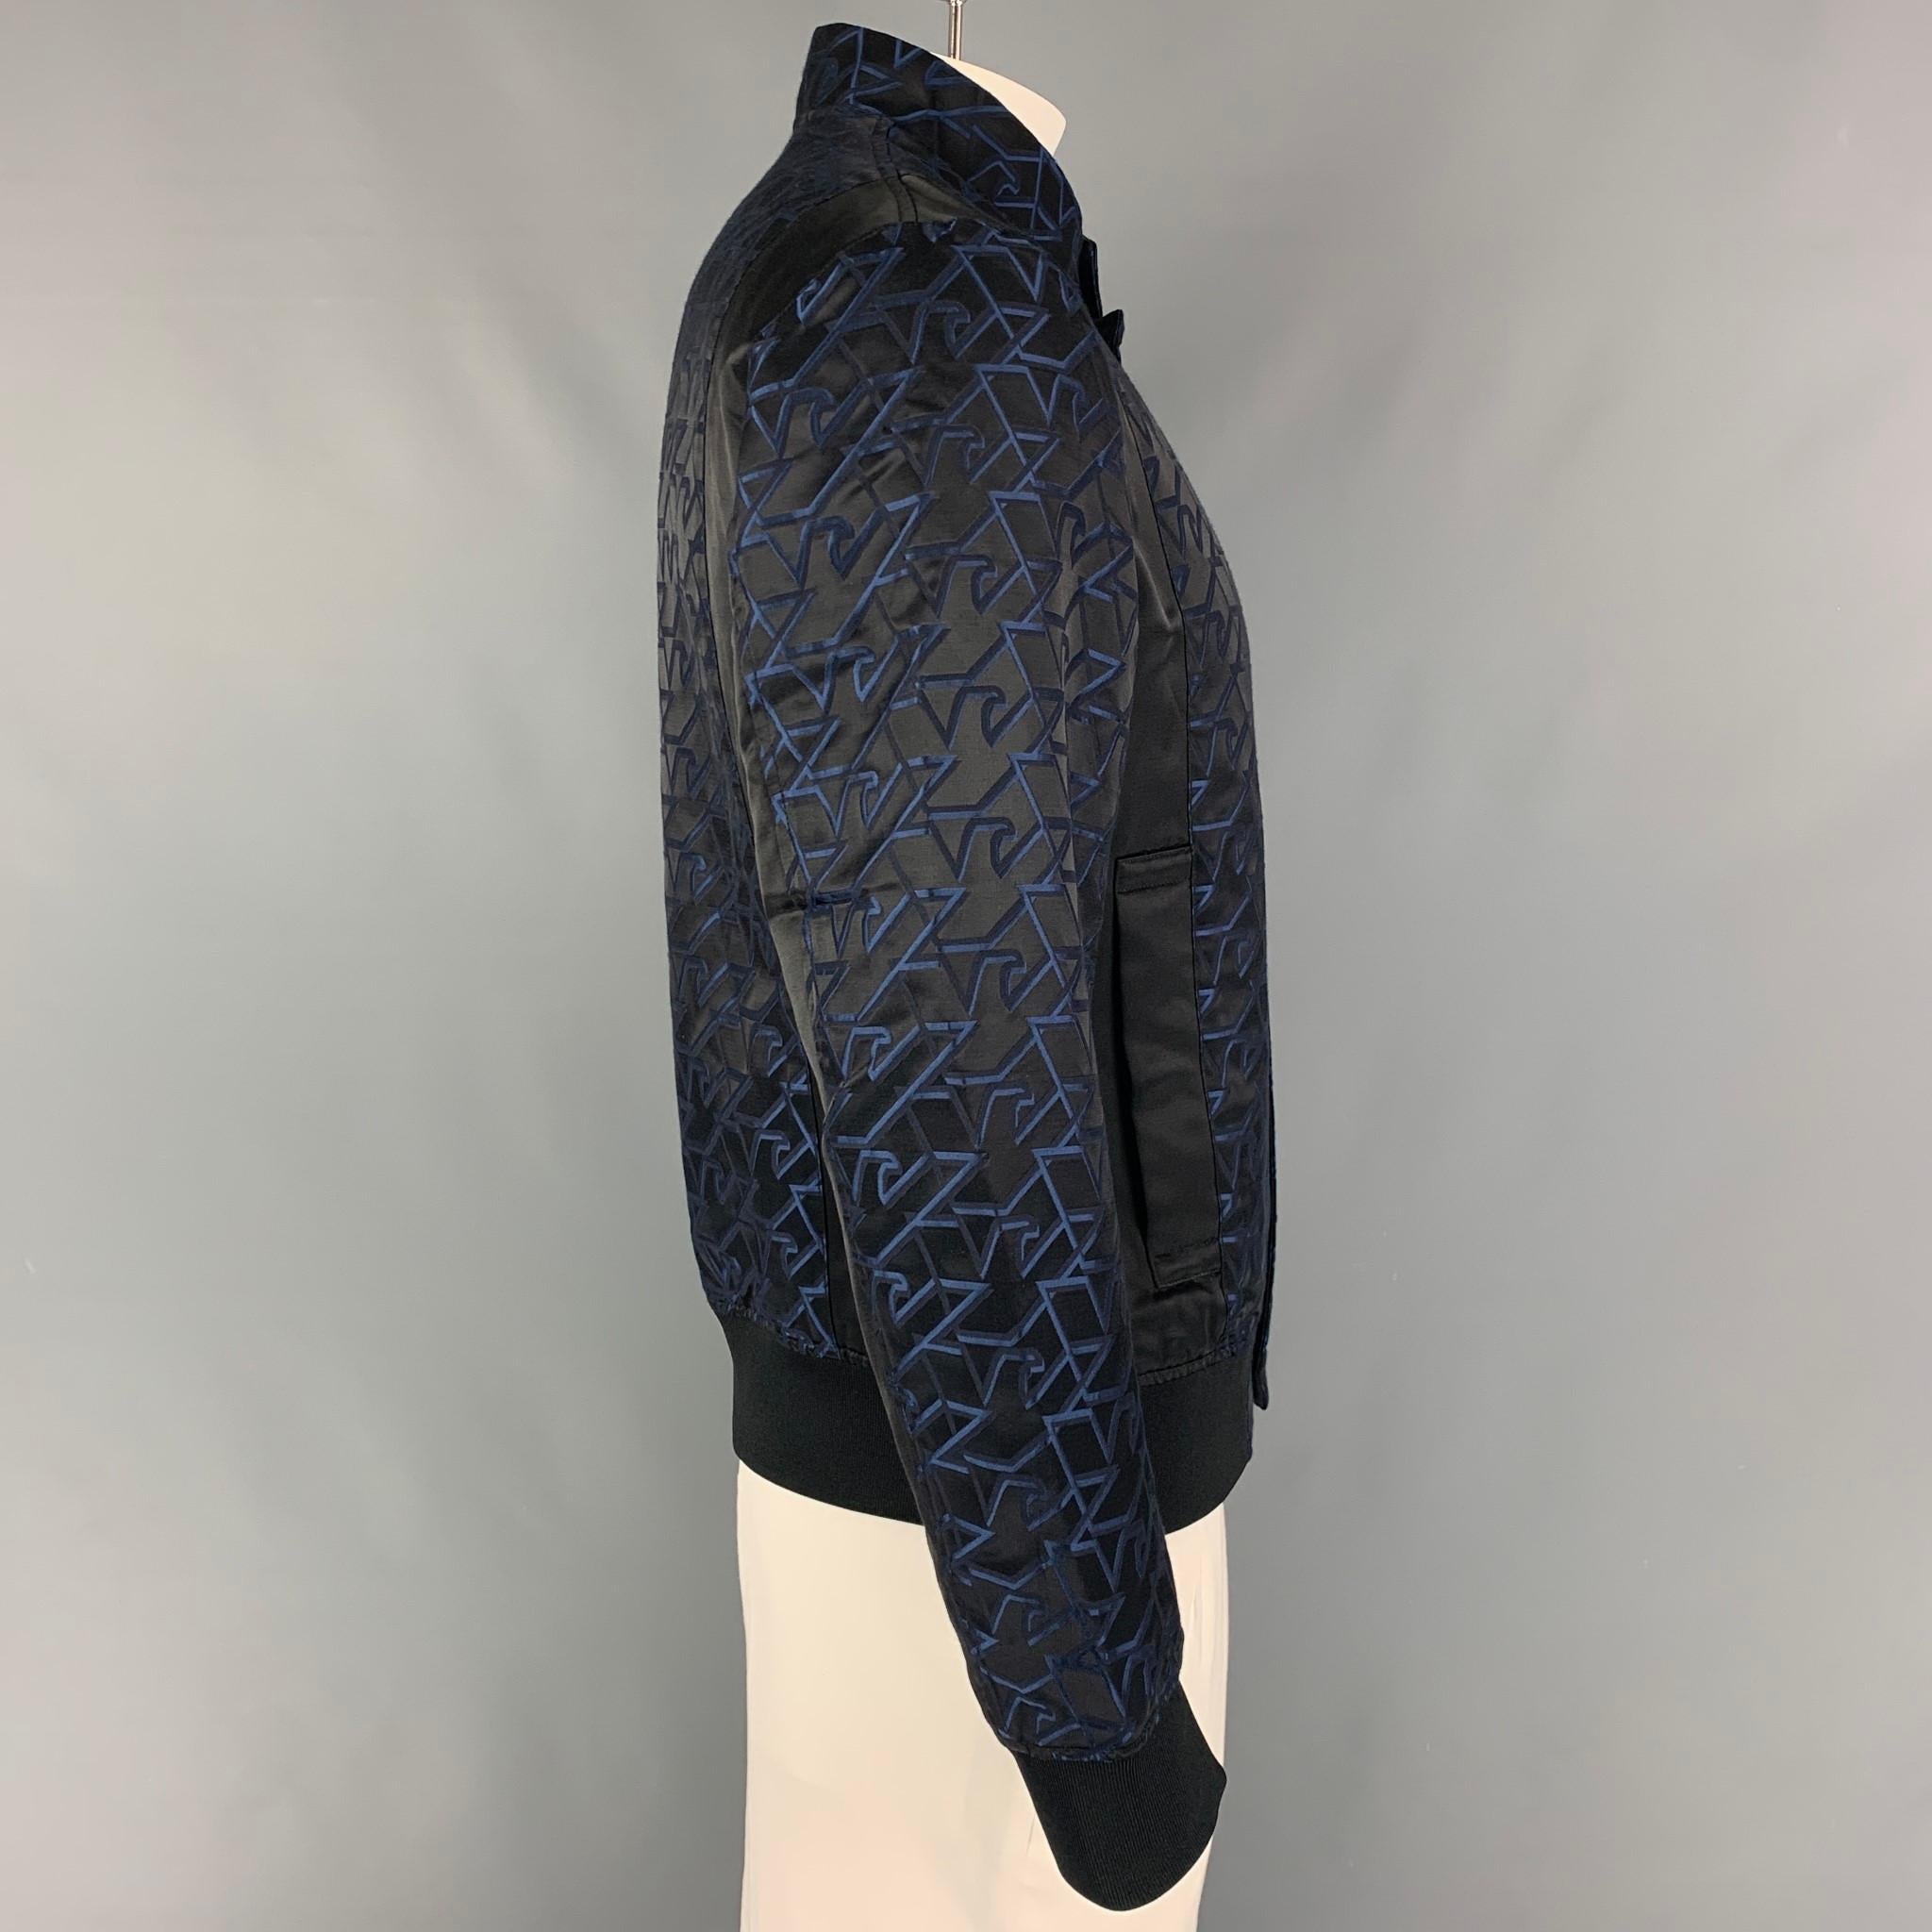 EMPORIO ARMANI jacket comes in a black & blue jacquard satin monogram print featuring a stand up collar, ribbed hem, slit pockets, and a hidden zip up closure. 

Excellent Pre-Owned Condition.
Marked: 52

Measurements:

Shoulder: 19 in.
Chest: 46